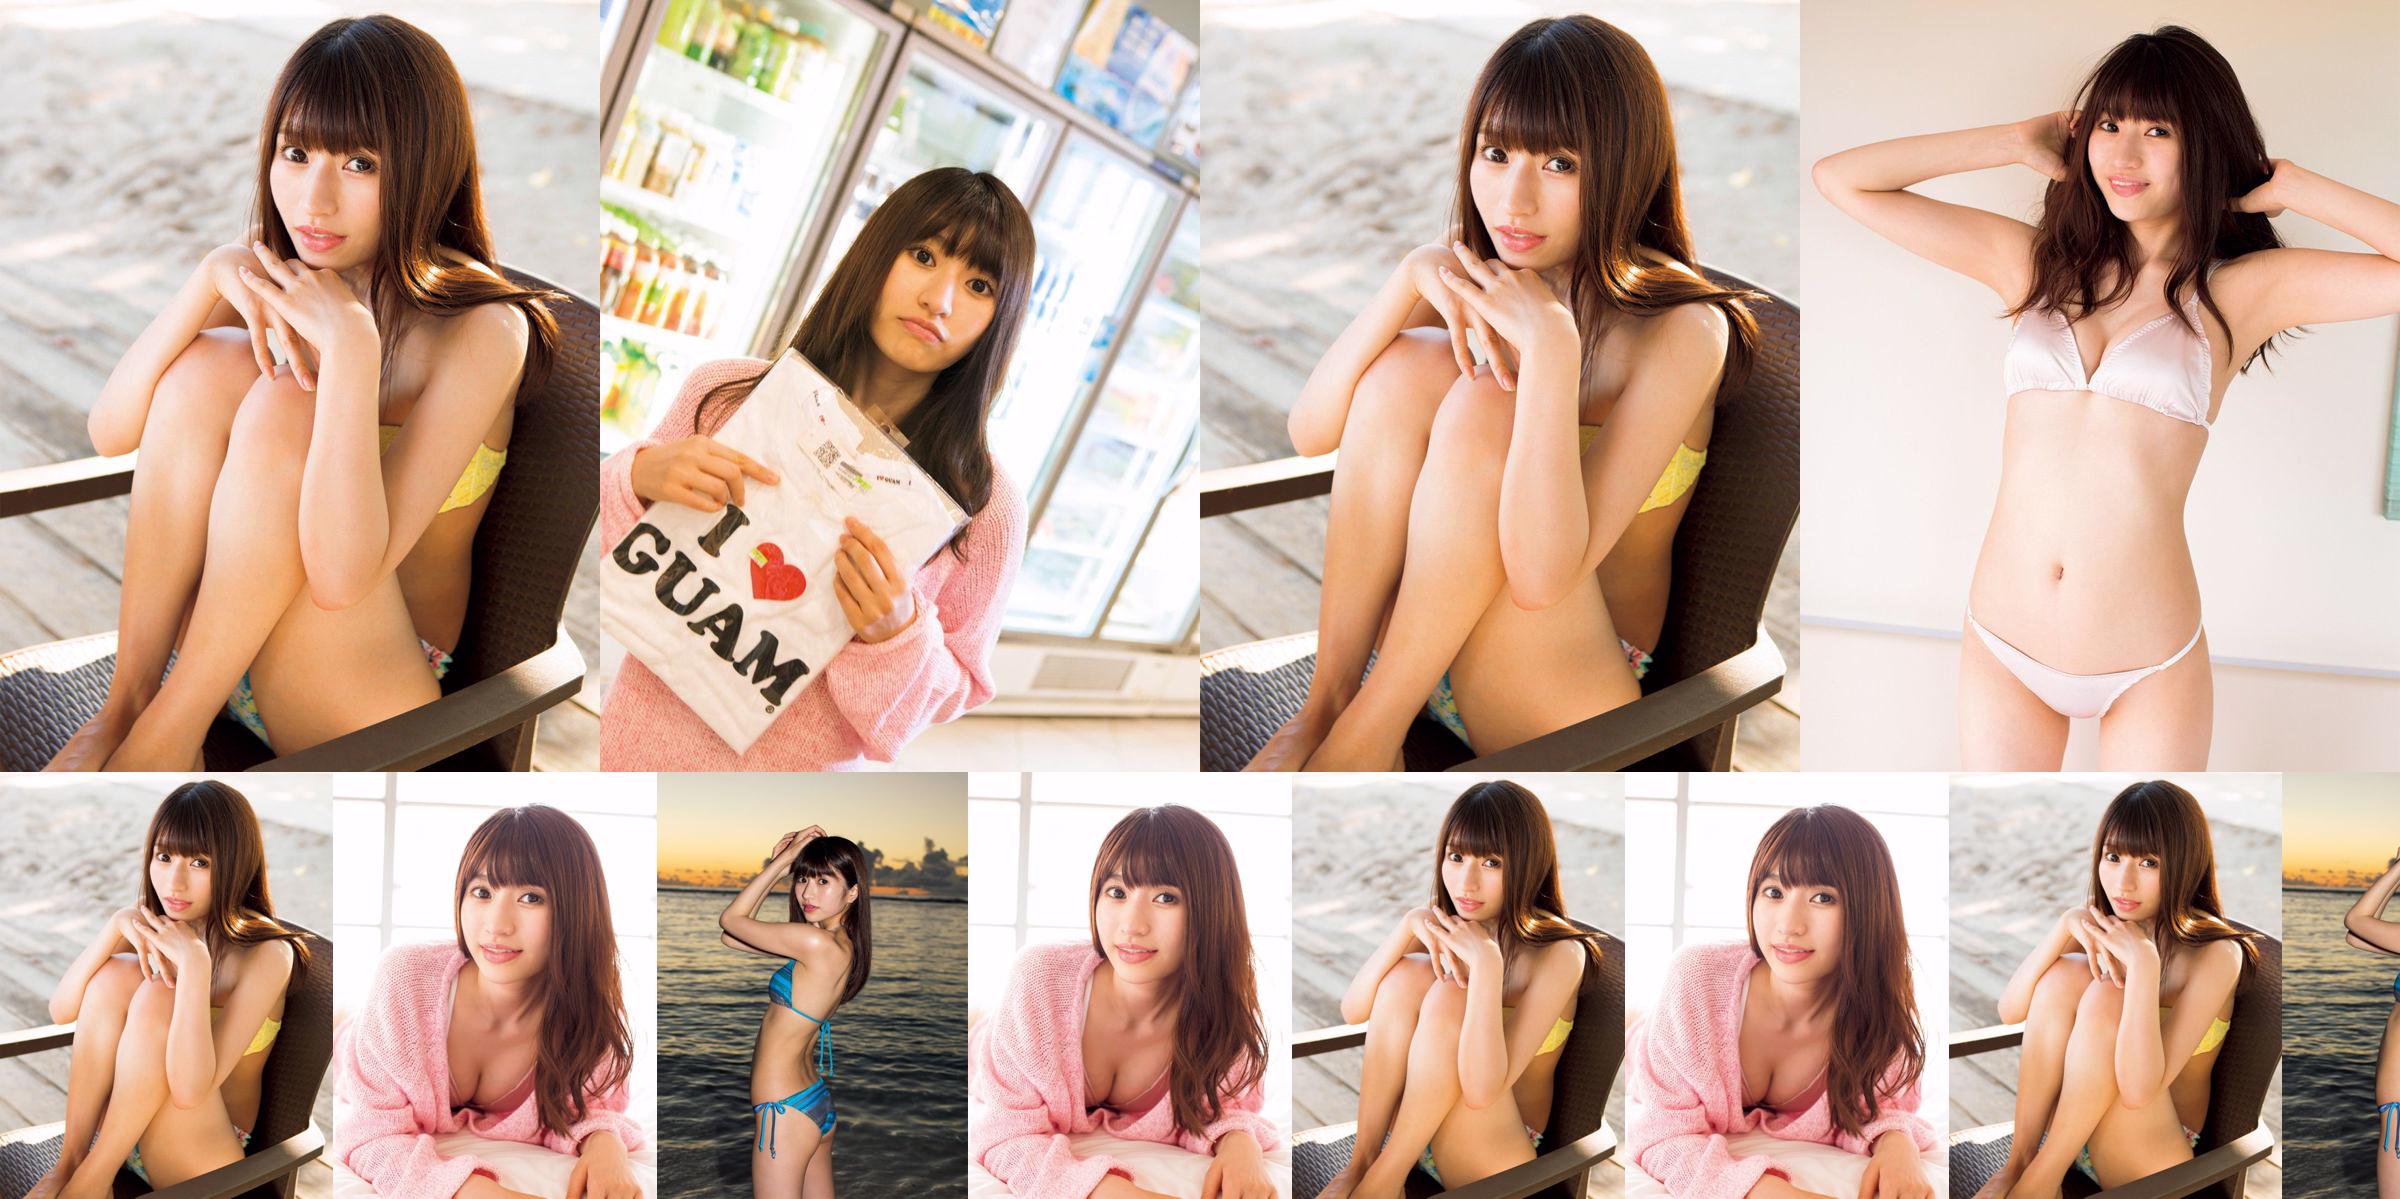 [FRIDAY] Rion "Small Devil Beauty" Photo No.988f08 Page 3